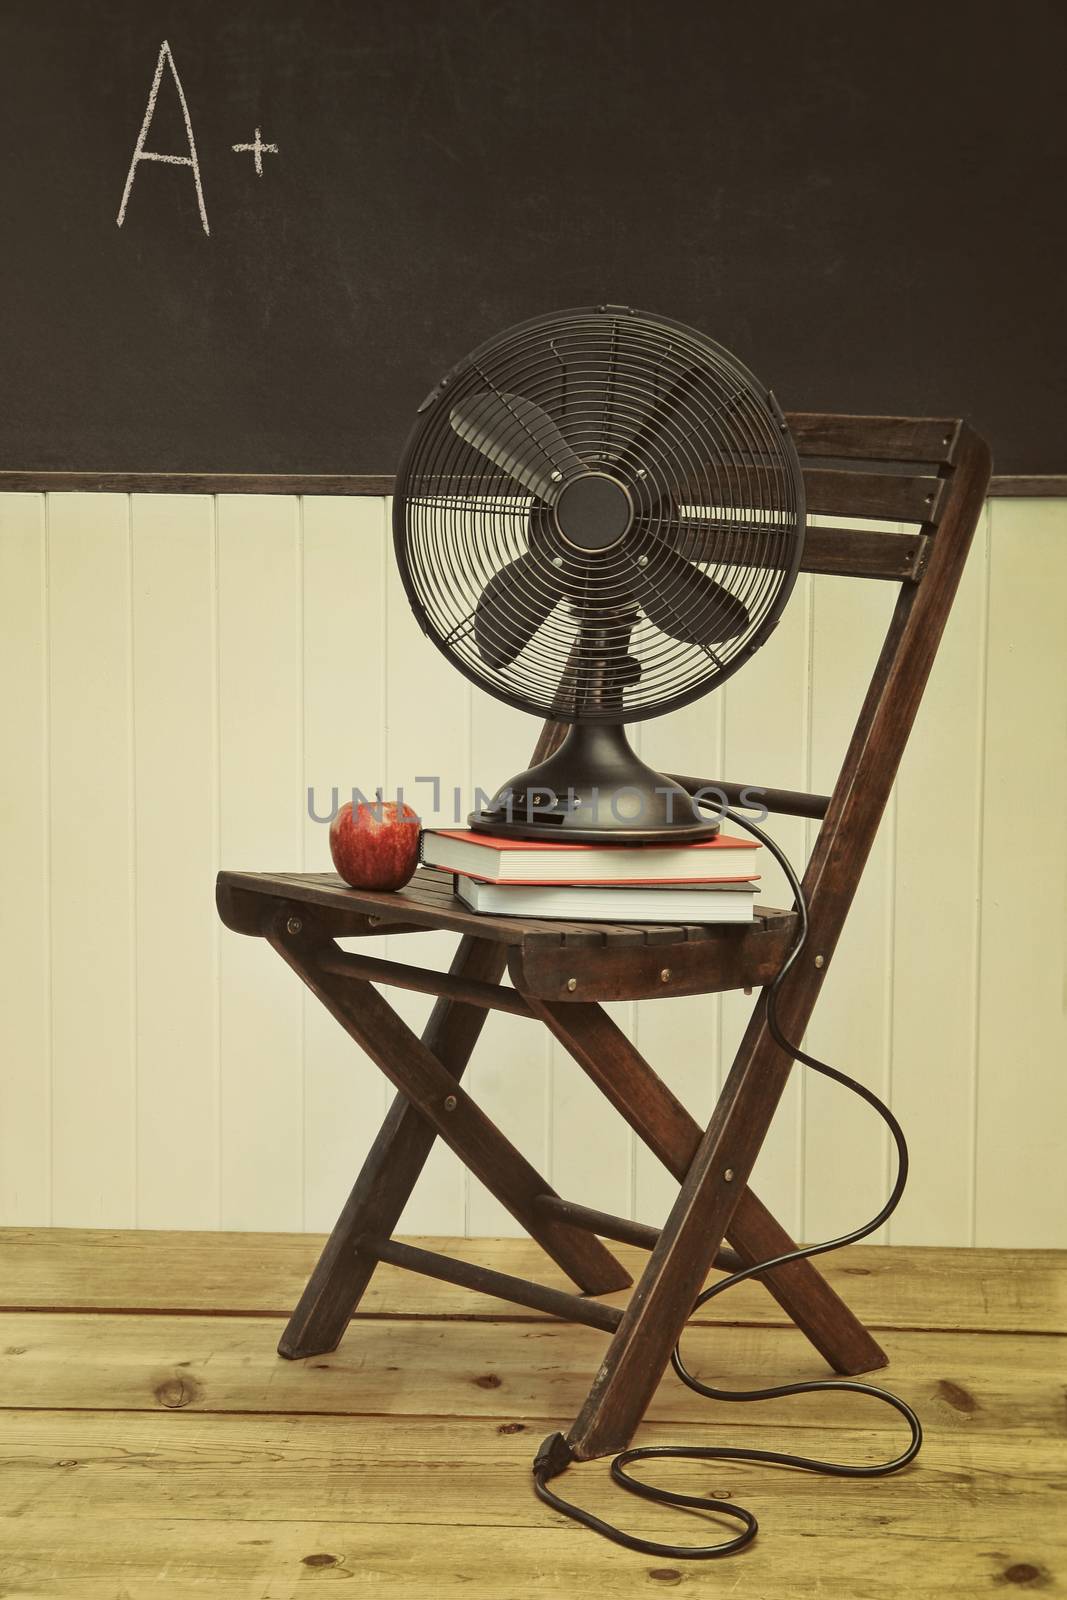 Old fan with apple and books on chair by Sandralise